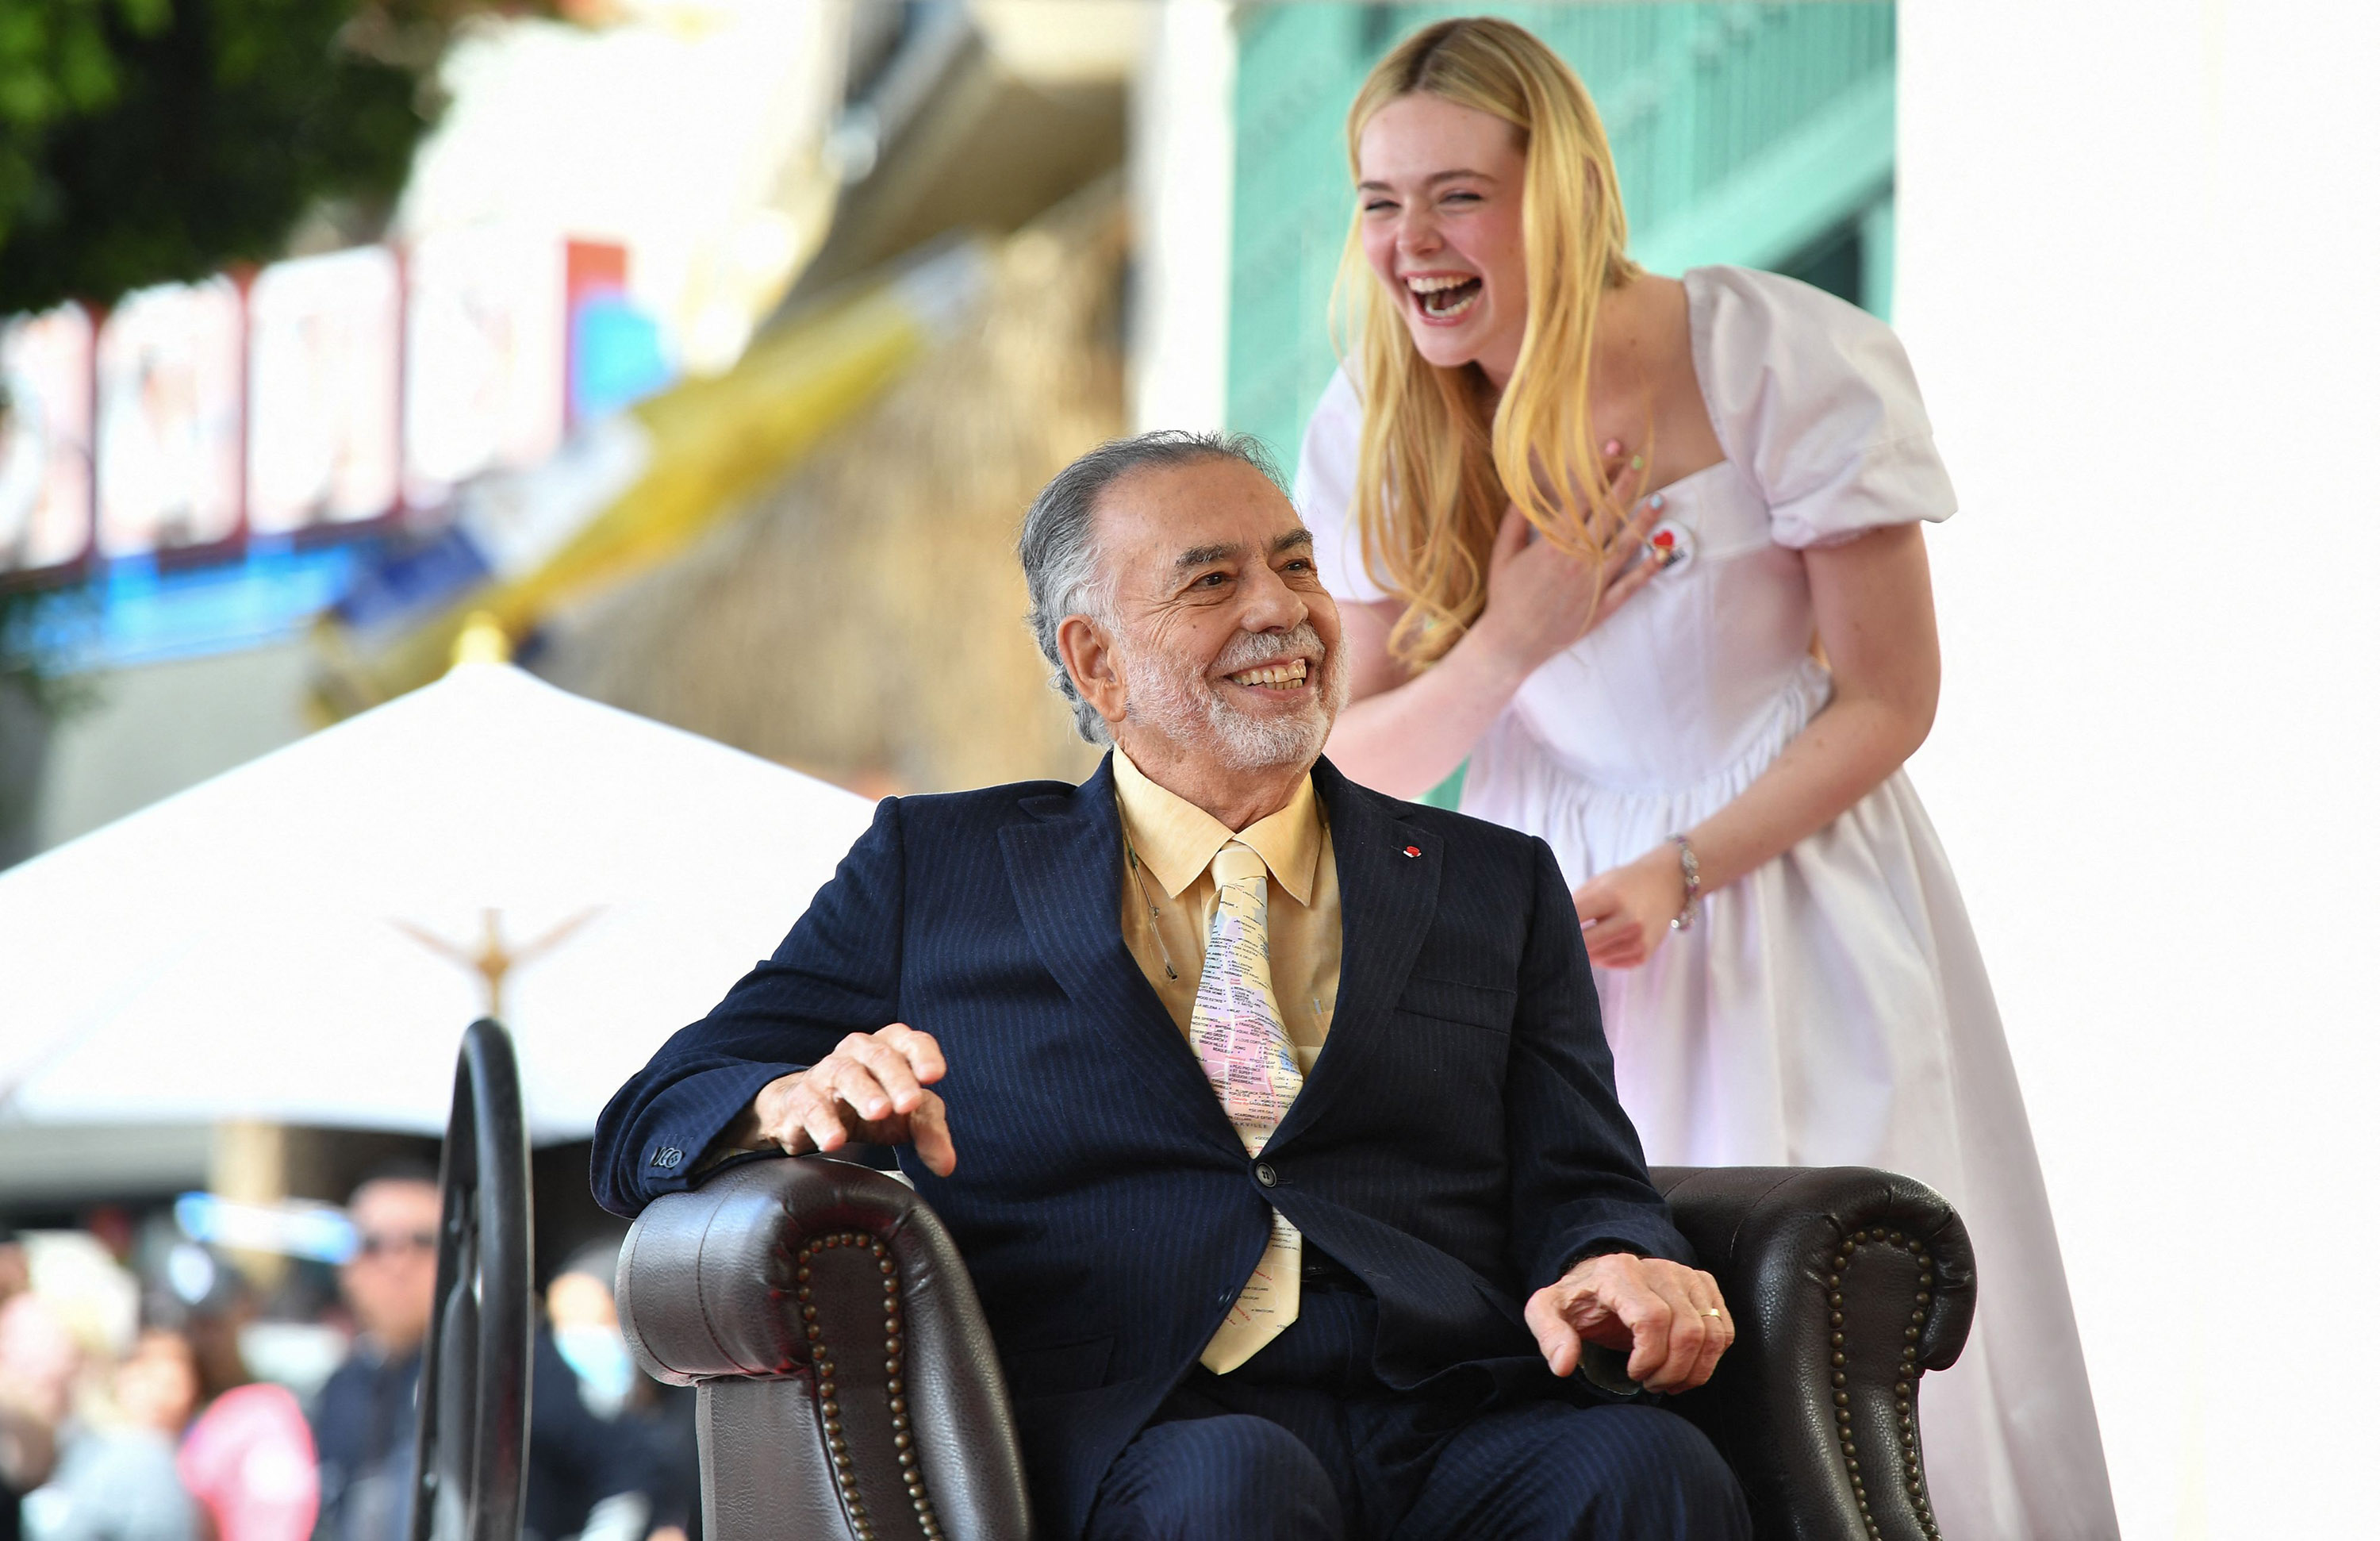 U.S. director Francis Ford Coppola and actress Elle Fanning laugh during Coppola's star ceremony on the Hollywood Walk of Fame on March 21, 2022, in Hollywood, Calif.